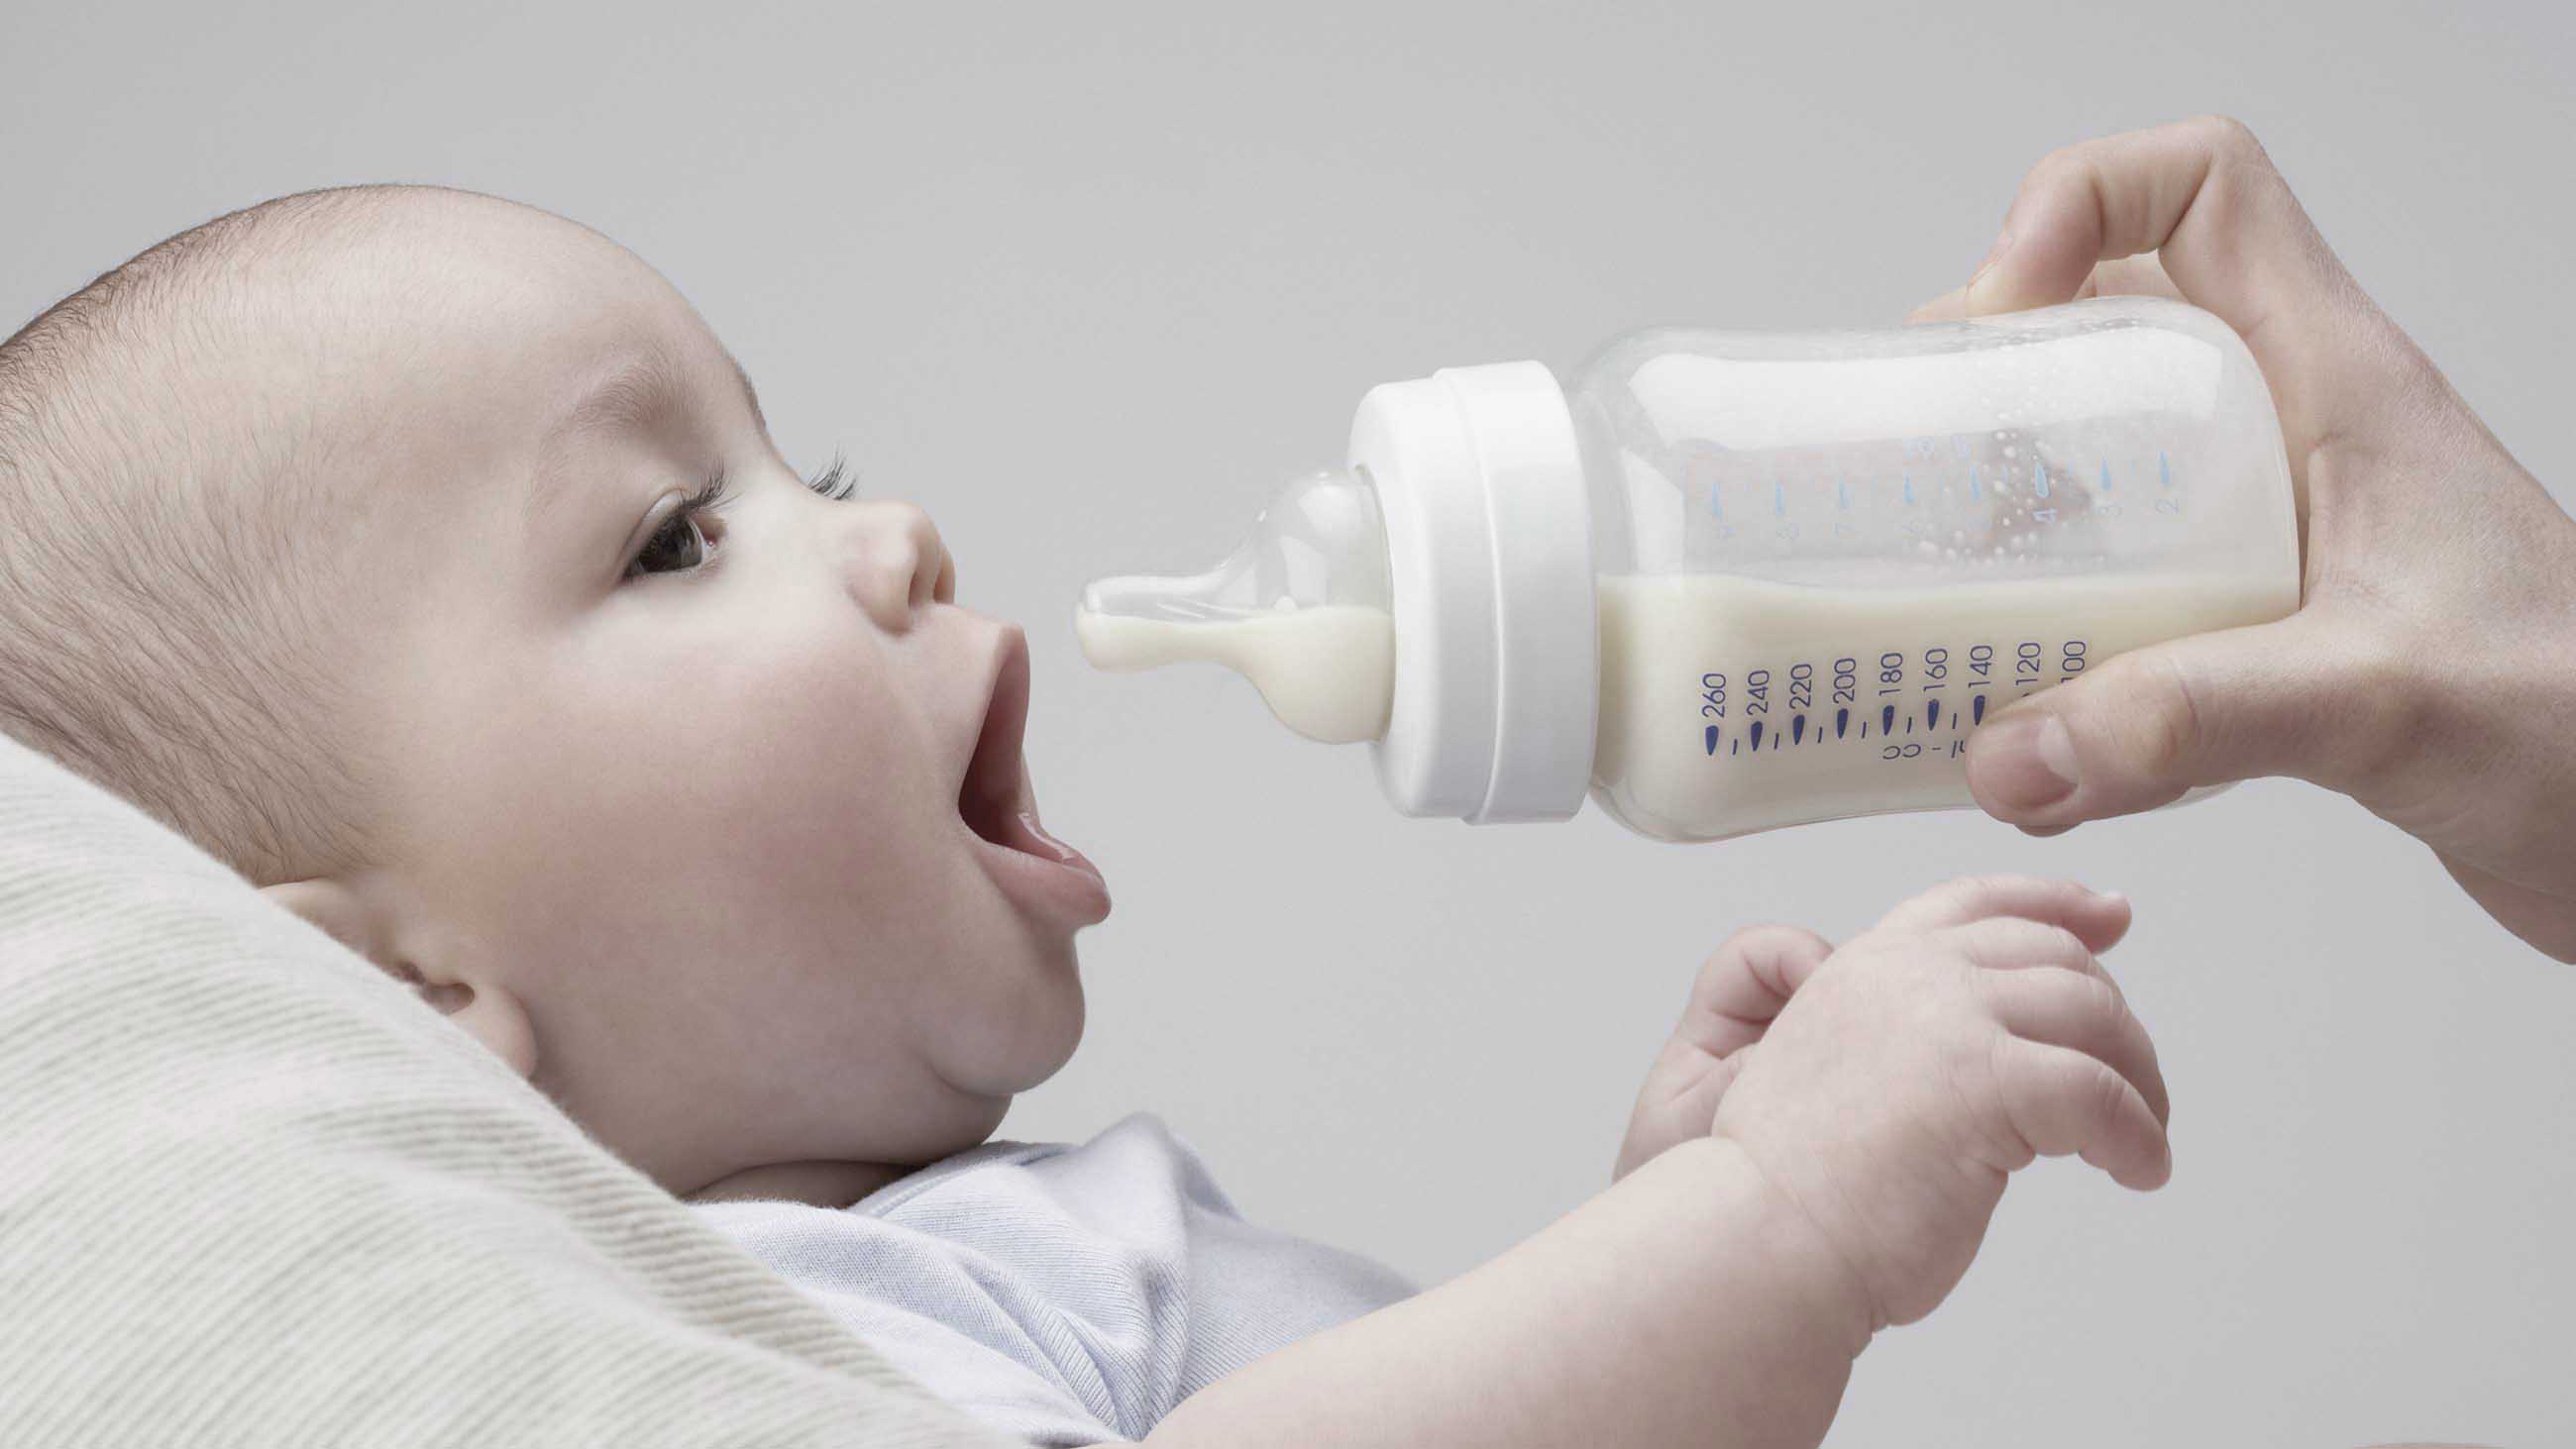 Soy milk and soy formula contain far more human hormone disruptors than cow or breast milk.